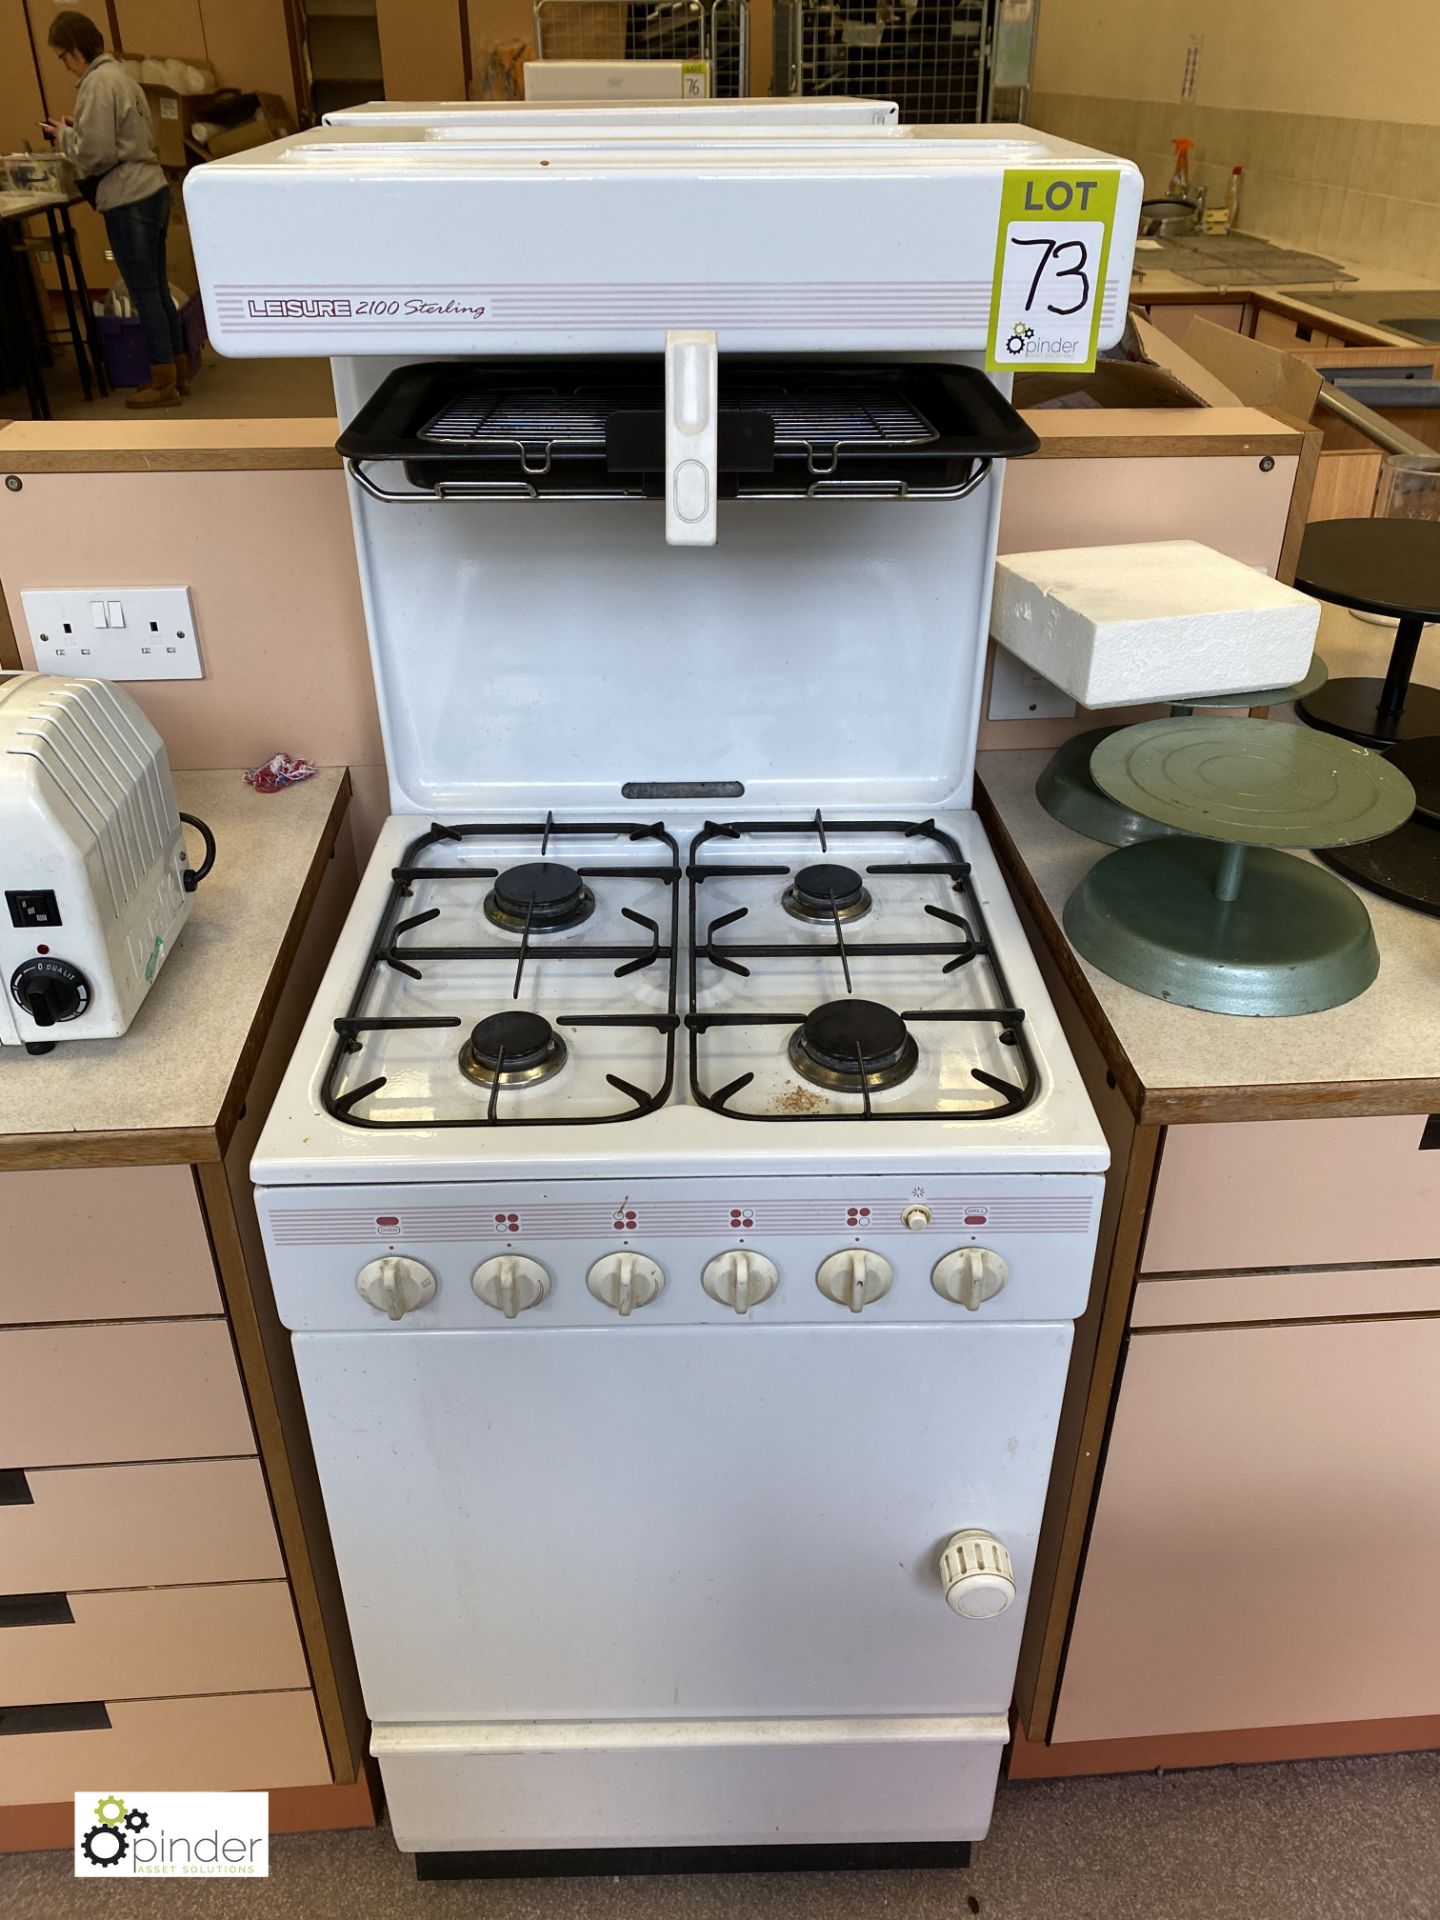 Leisure 2100 Sterling 4-ring Gas Oven and Grill (location: Level 2, B276 Room)